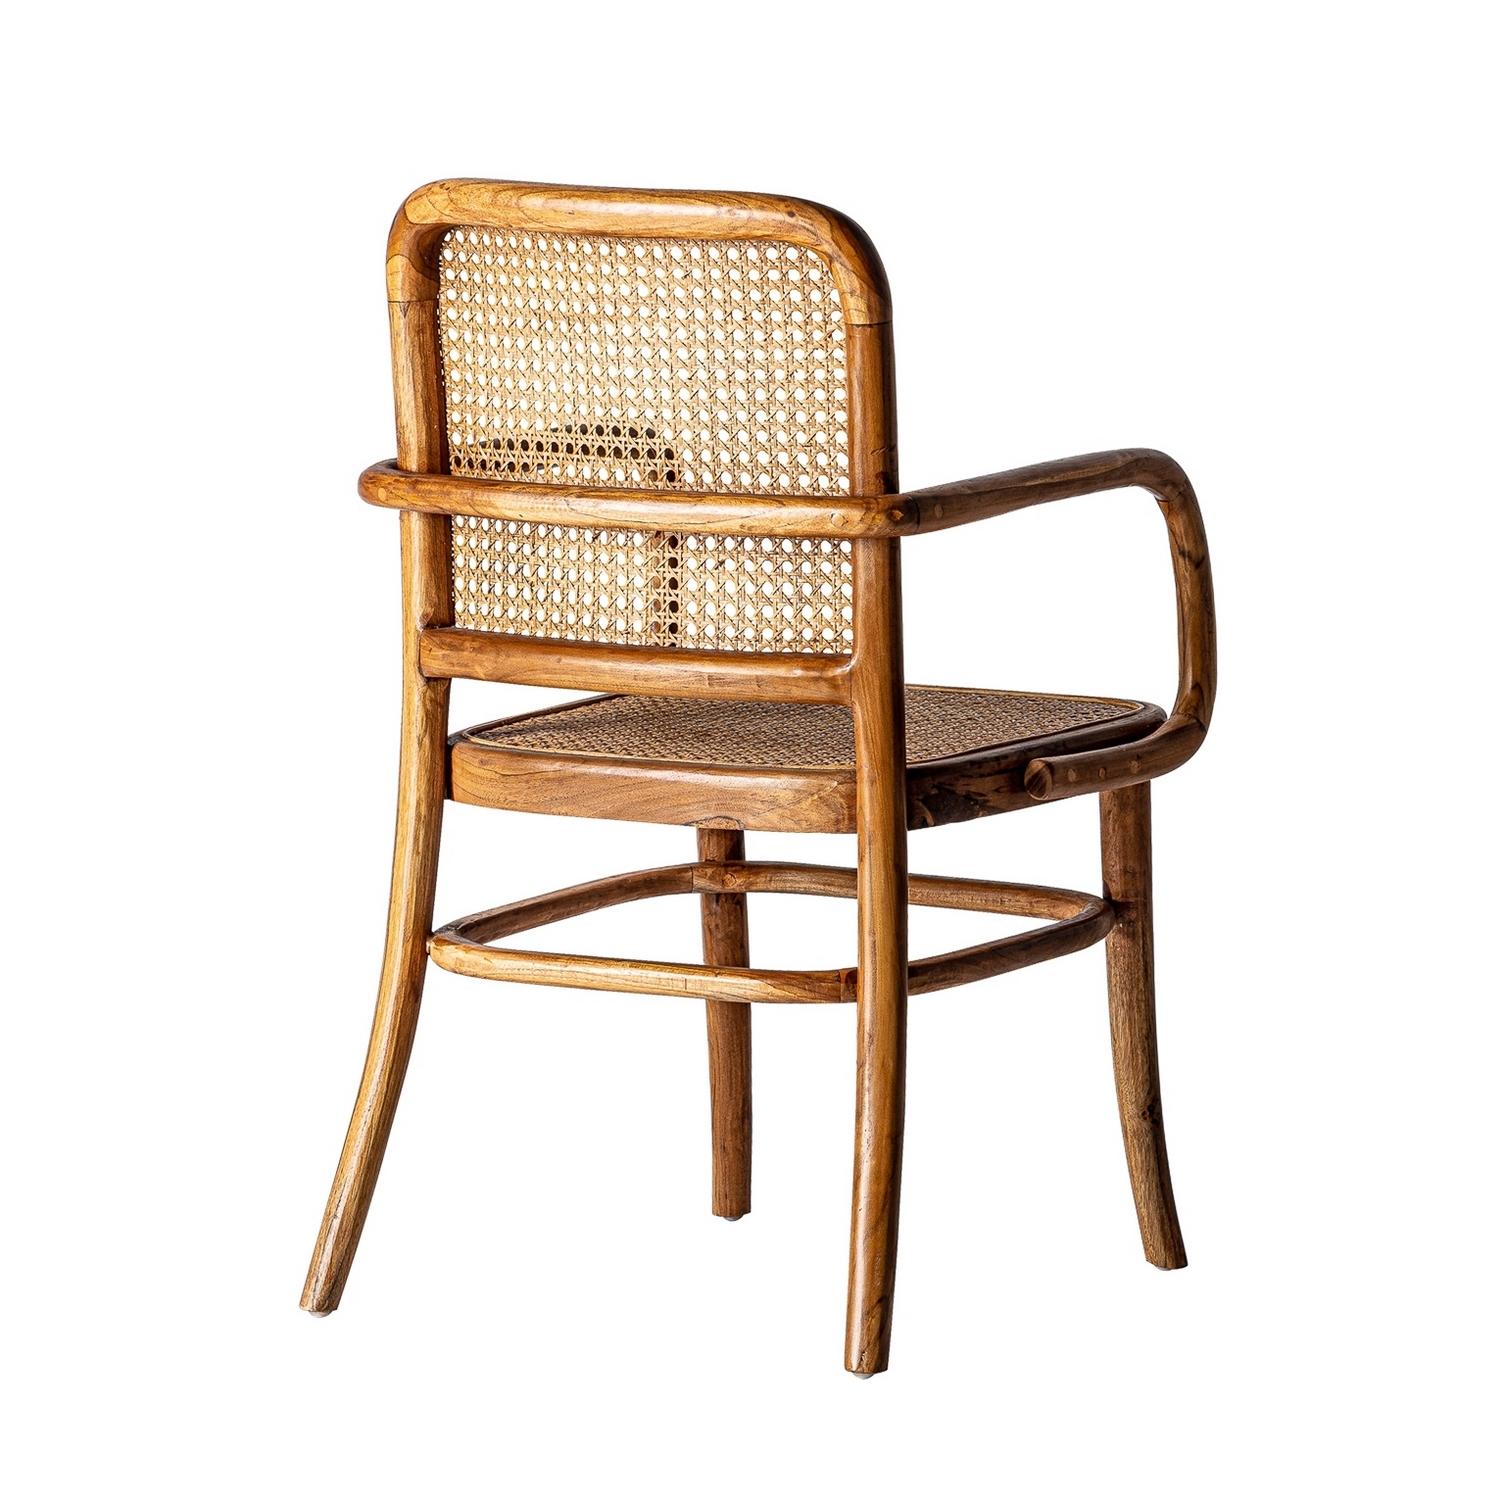 Bistro design style teak curved wooden and rattan wicker cane armchair.